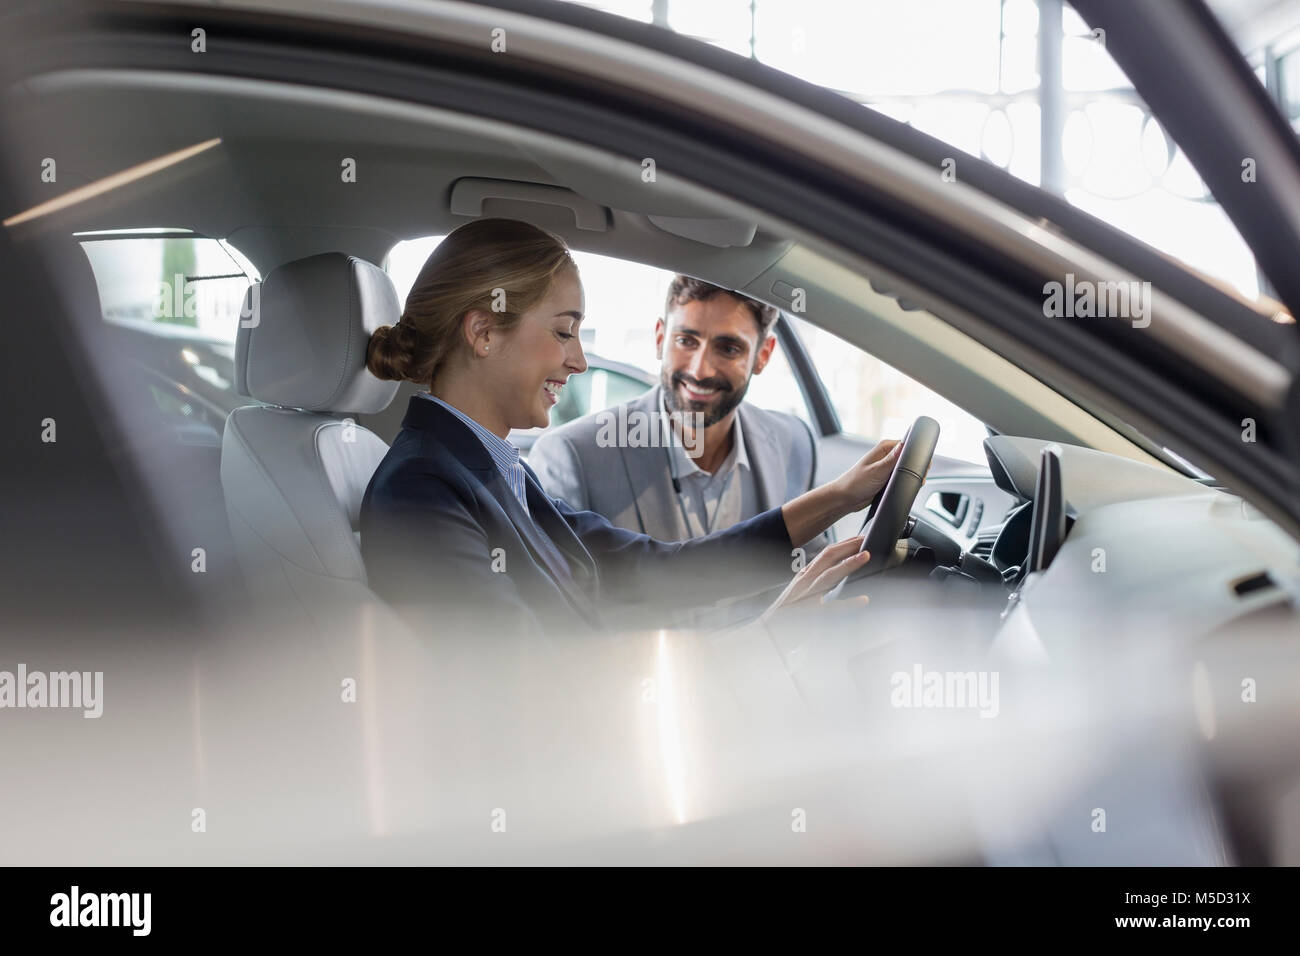 Car salesman showing new car to female customer in driver’s seat in car dealership showroom Stock Photo